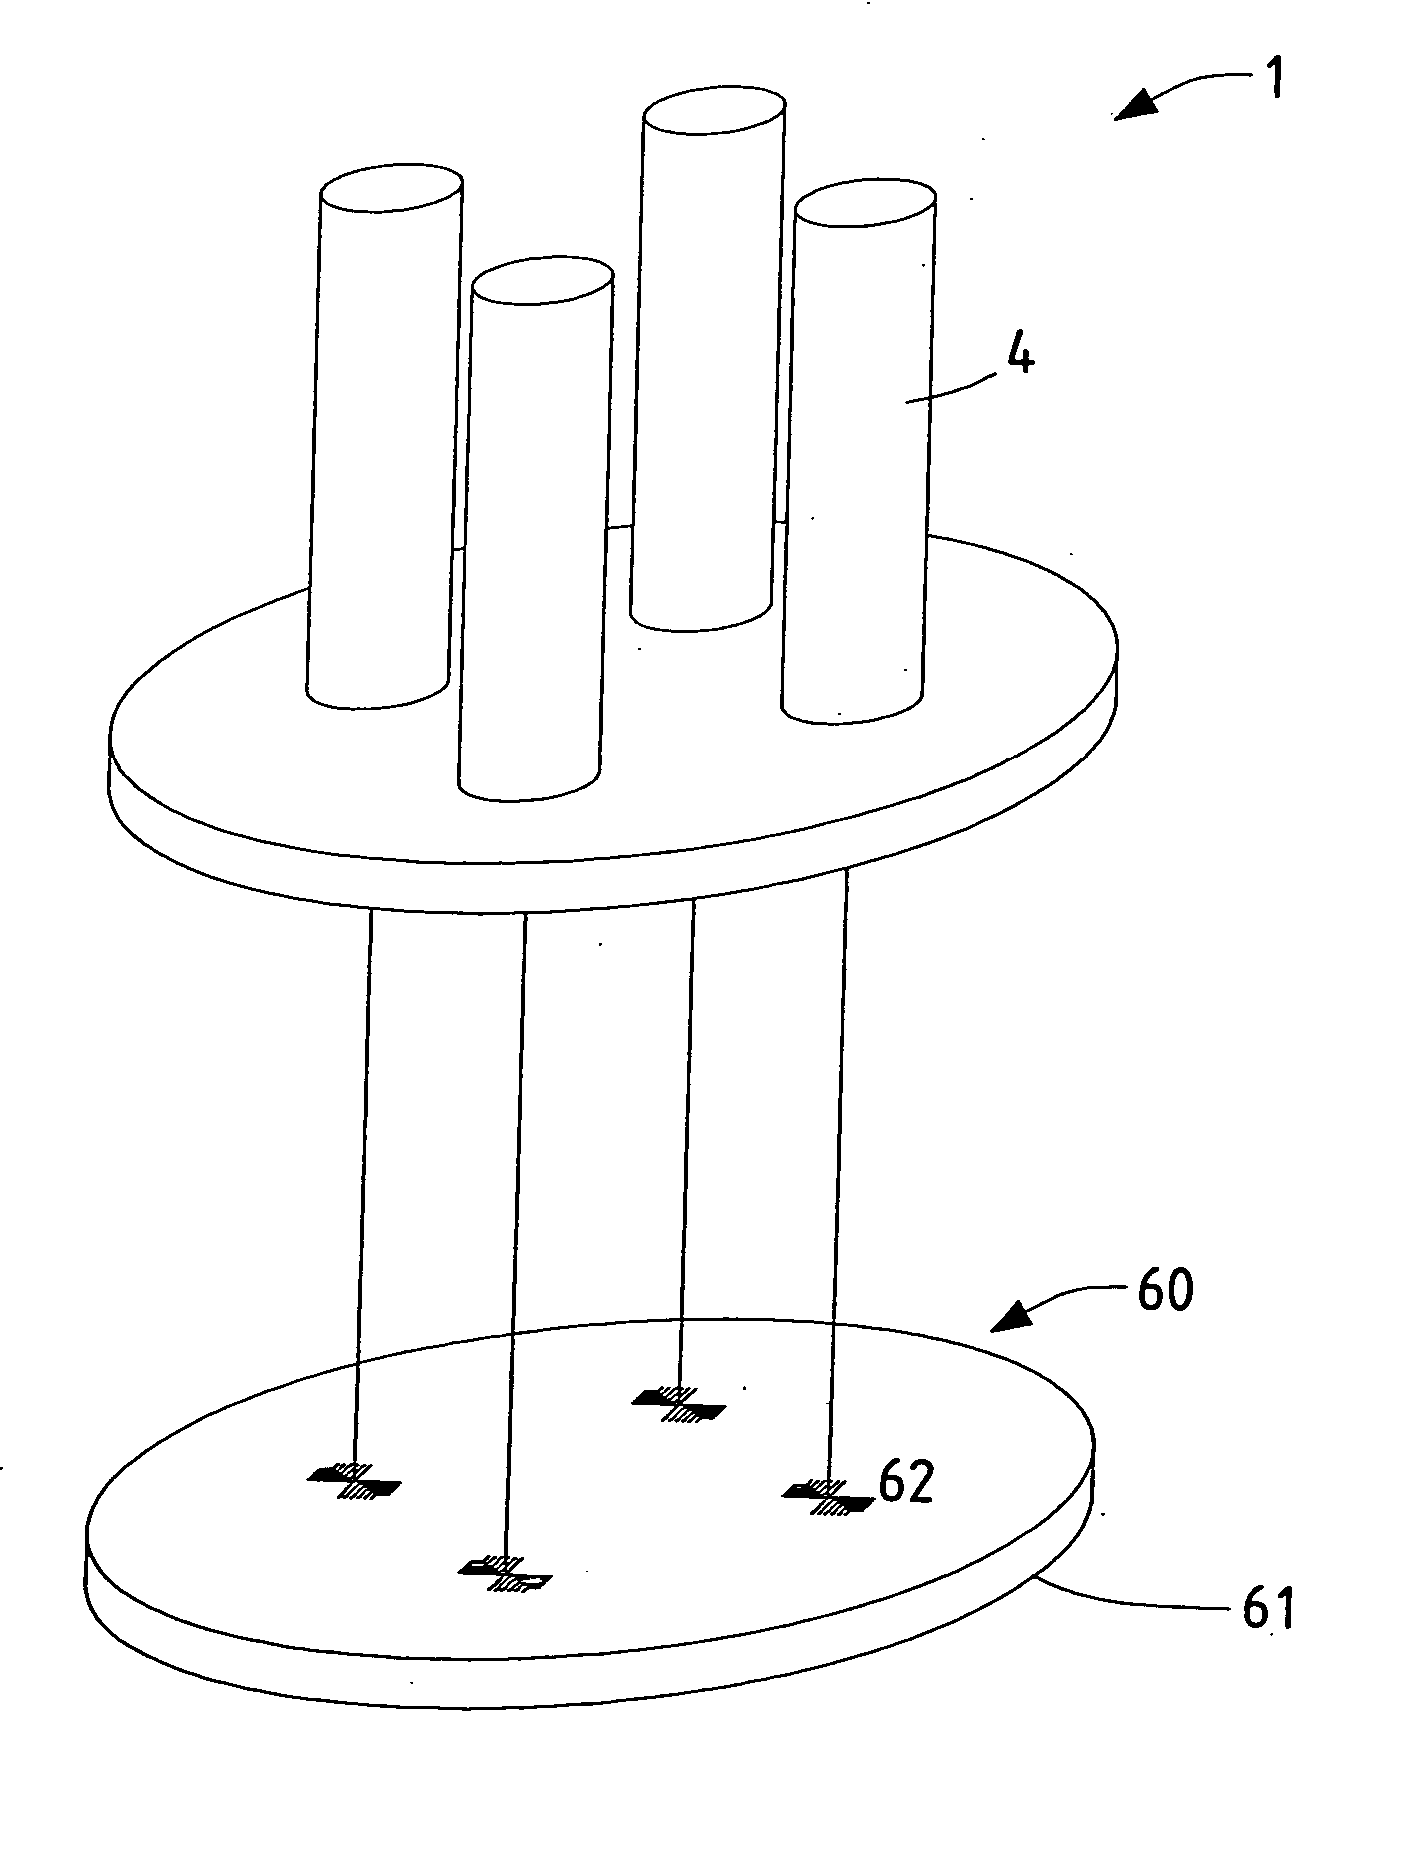 Charged-particle multi-beam exposure apparatus